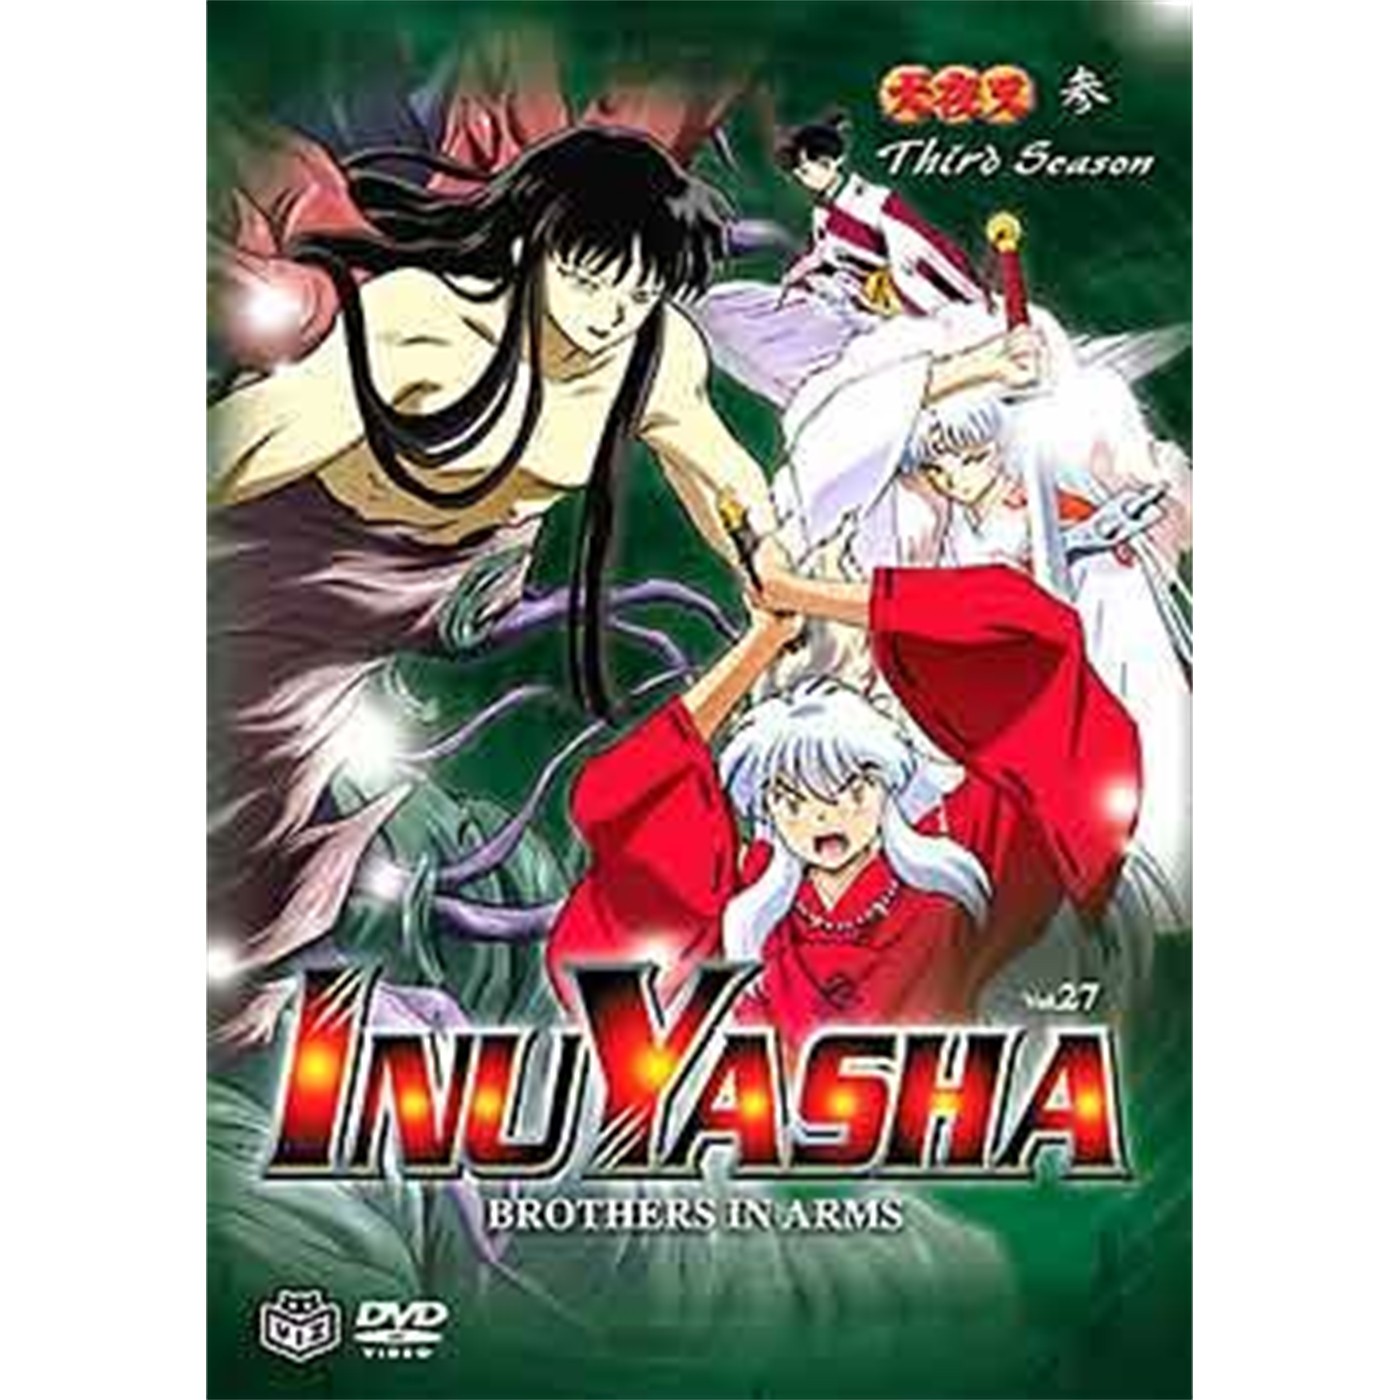 InuYasha, Vol. 27: Brothers In Arms (DVD)